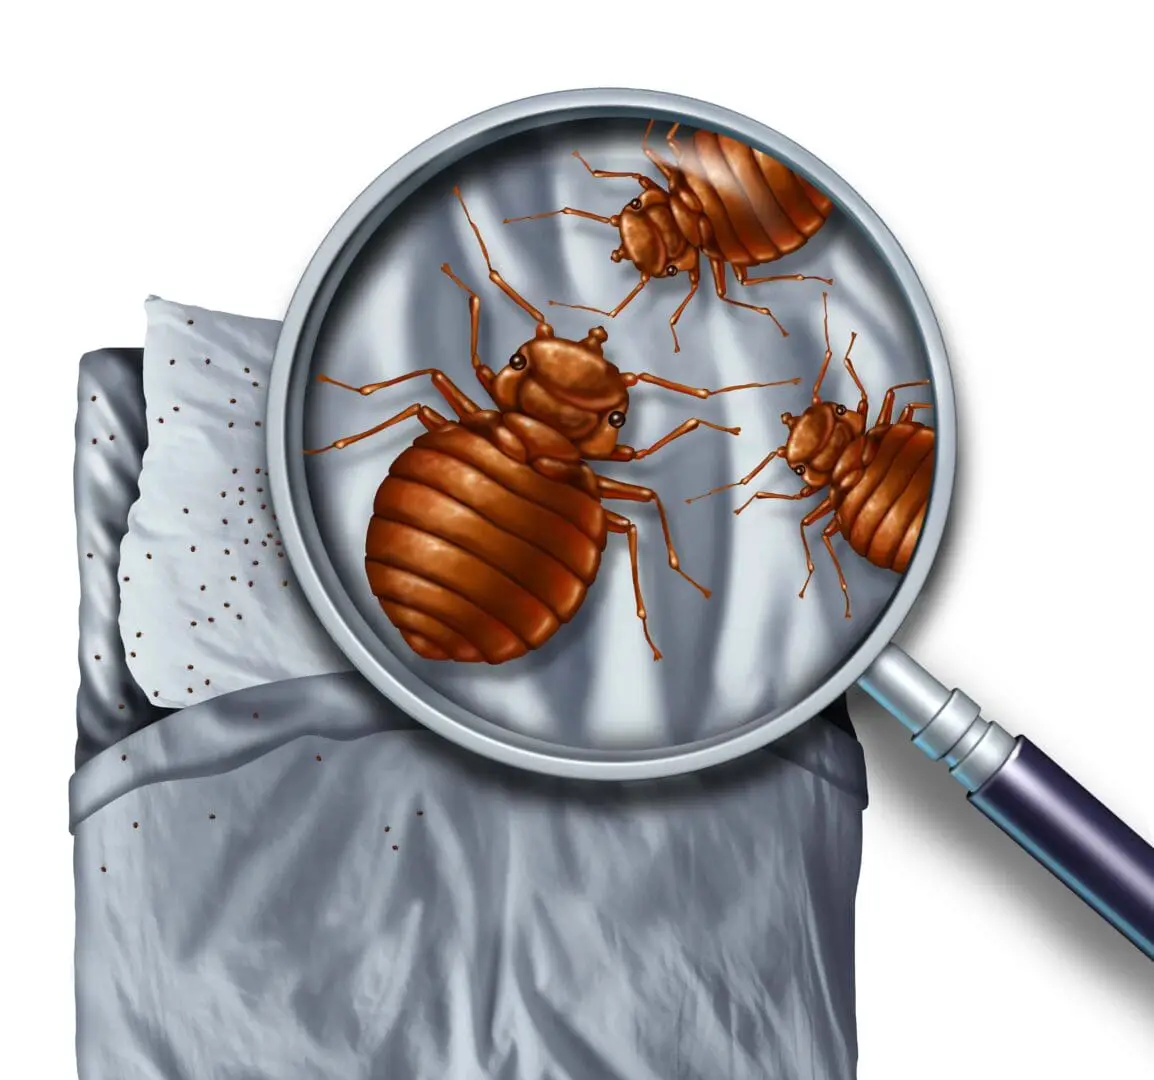 Bed Bug Mattress Covers: Do they Work? Complete Guide